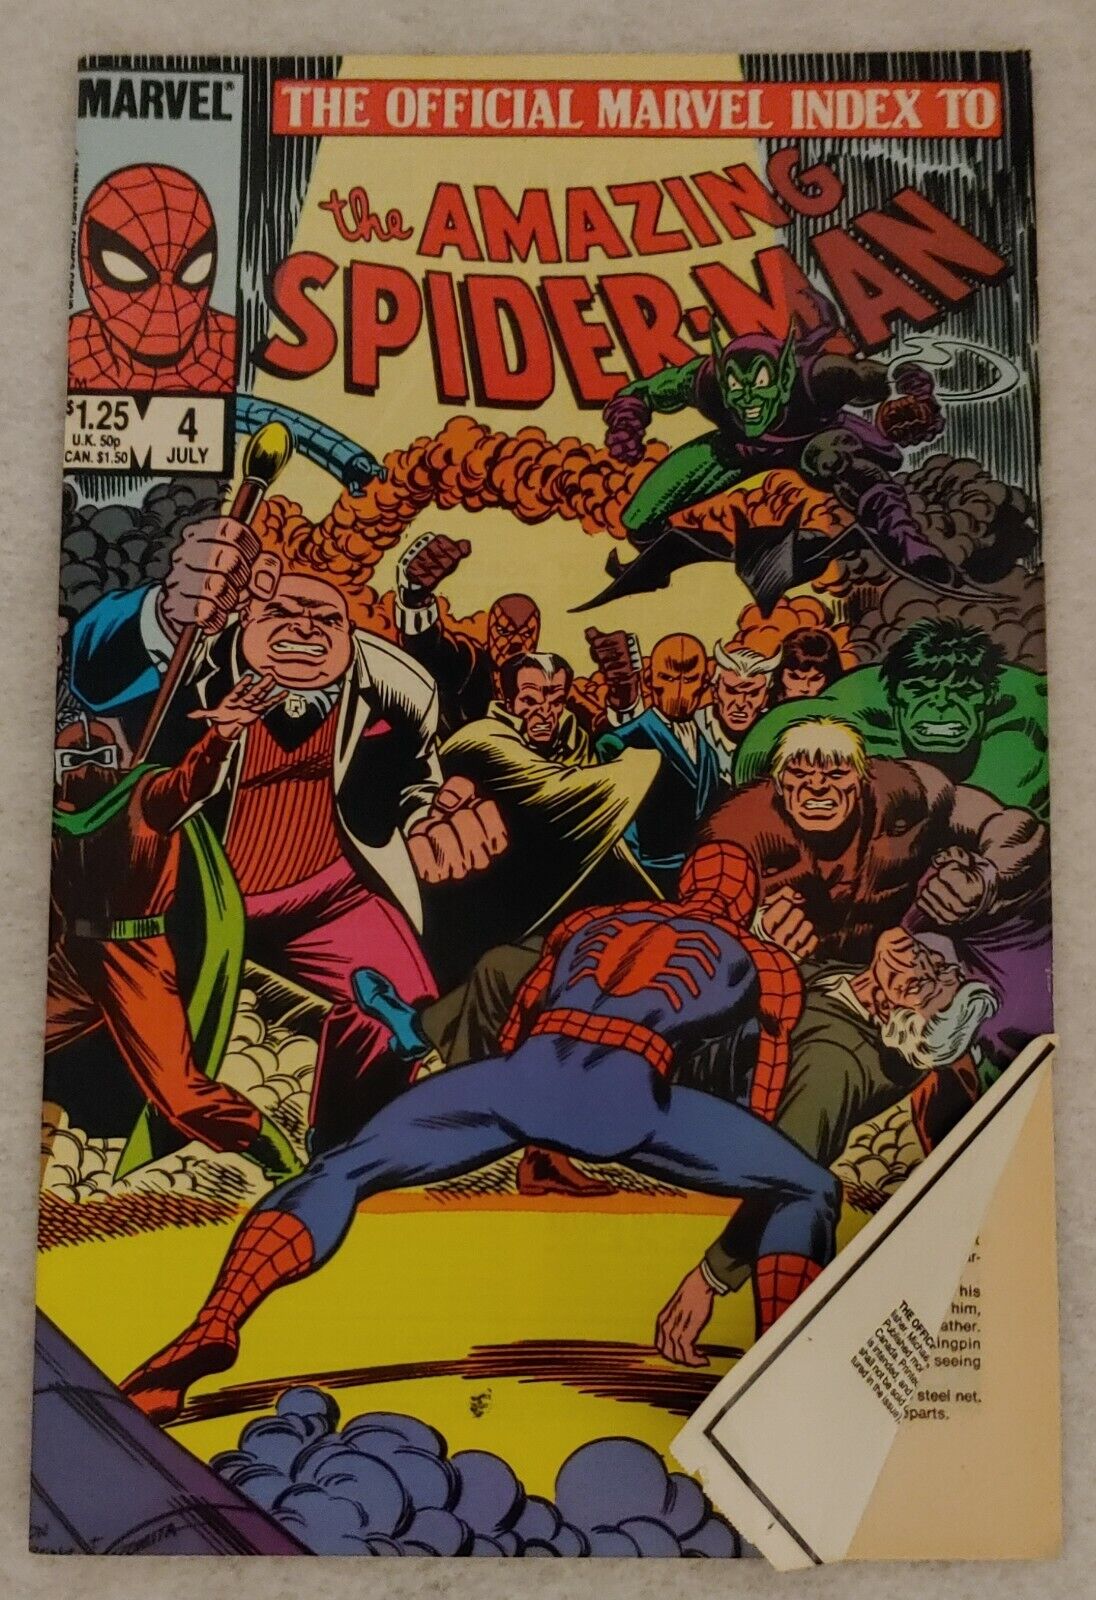 Marvel Comic The Amazing Spider-Man, July 1985, No.4 VERY RARE FRONT PAGE MISCUT